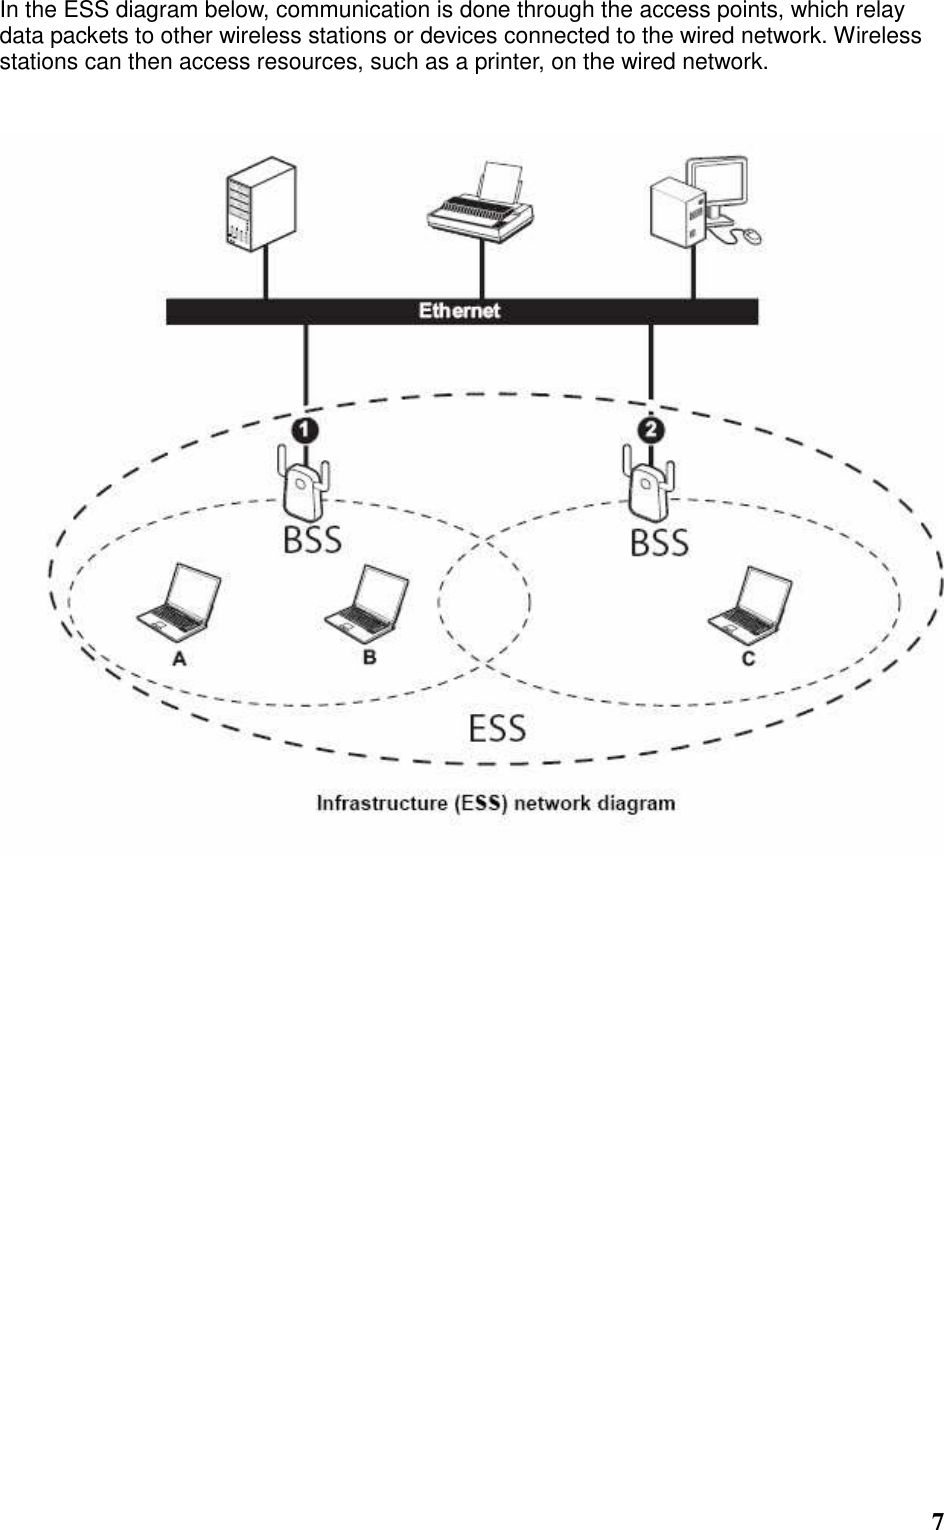 7 In the ESS diagram below, communication is done through the access points, which relay data packets to other wireless stations or devices connected to the wired network. Wireless stations can then access resources, such as a printer, on the wired network.                   